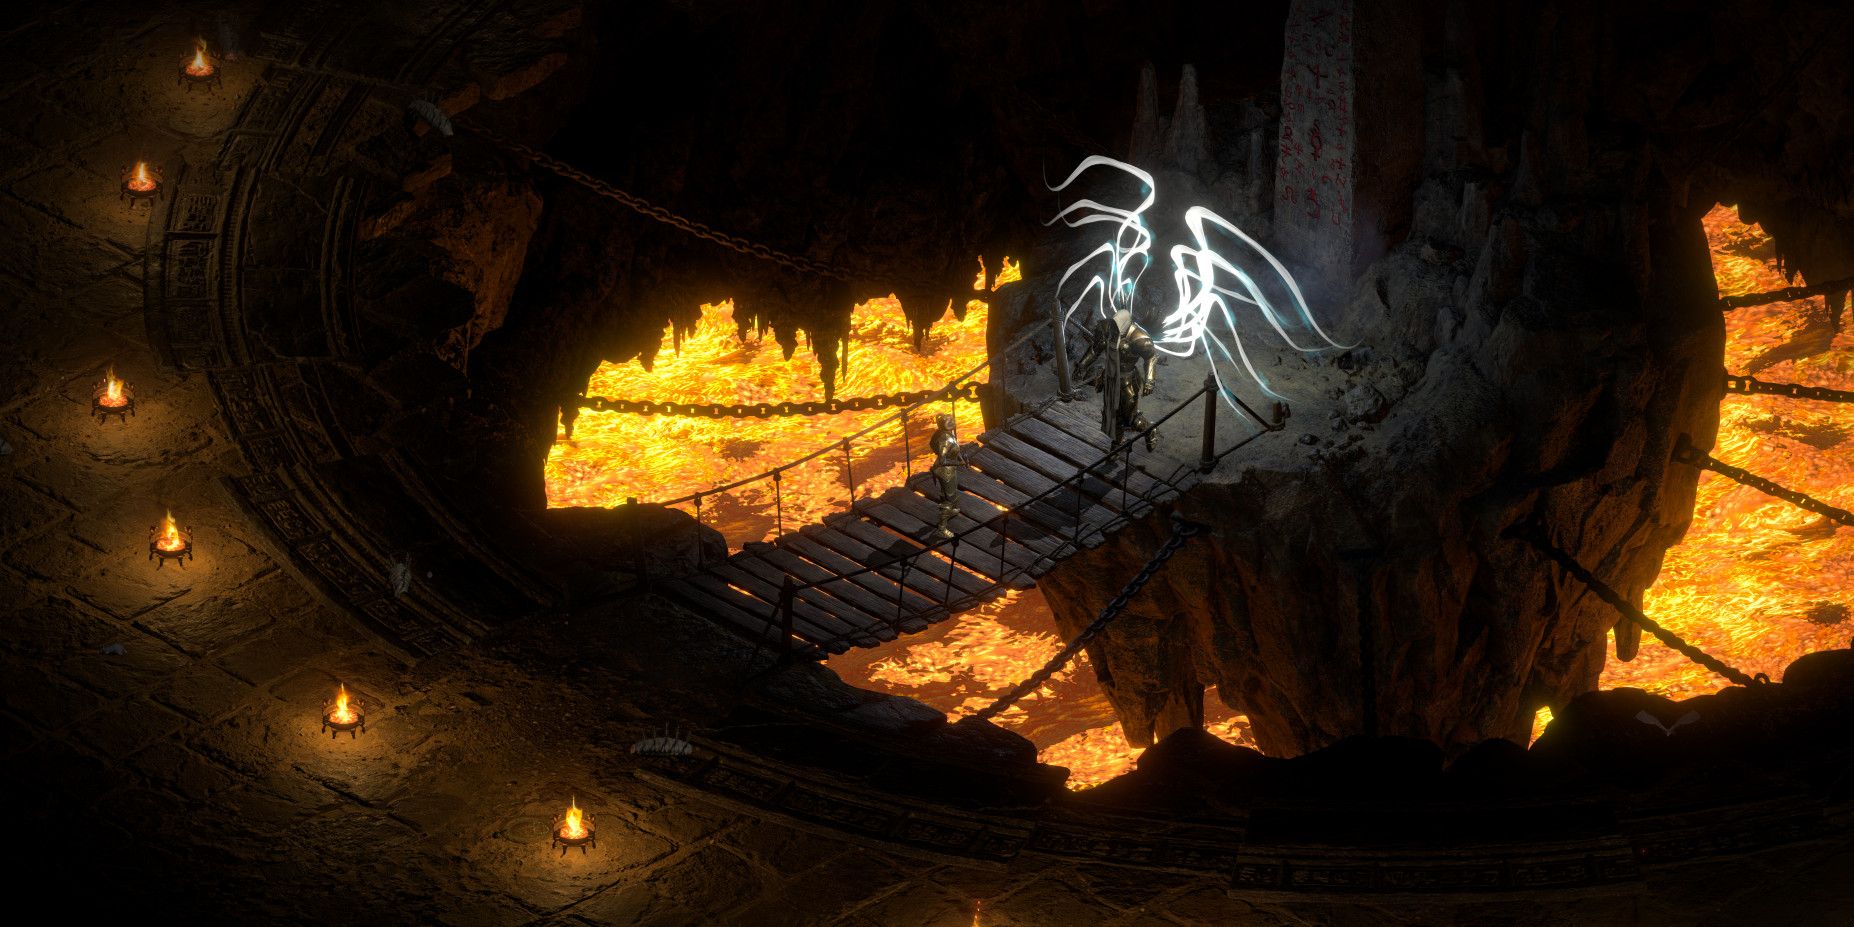 Diablo 2 Resurrected Designer Tells Fans To Follow Their Heart In Purchase Decision